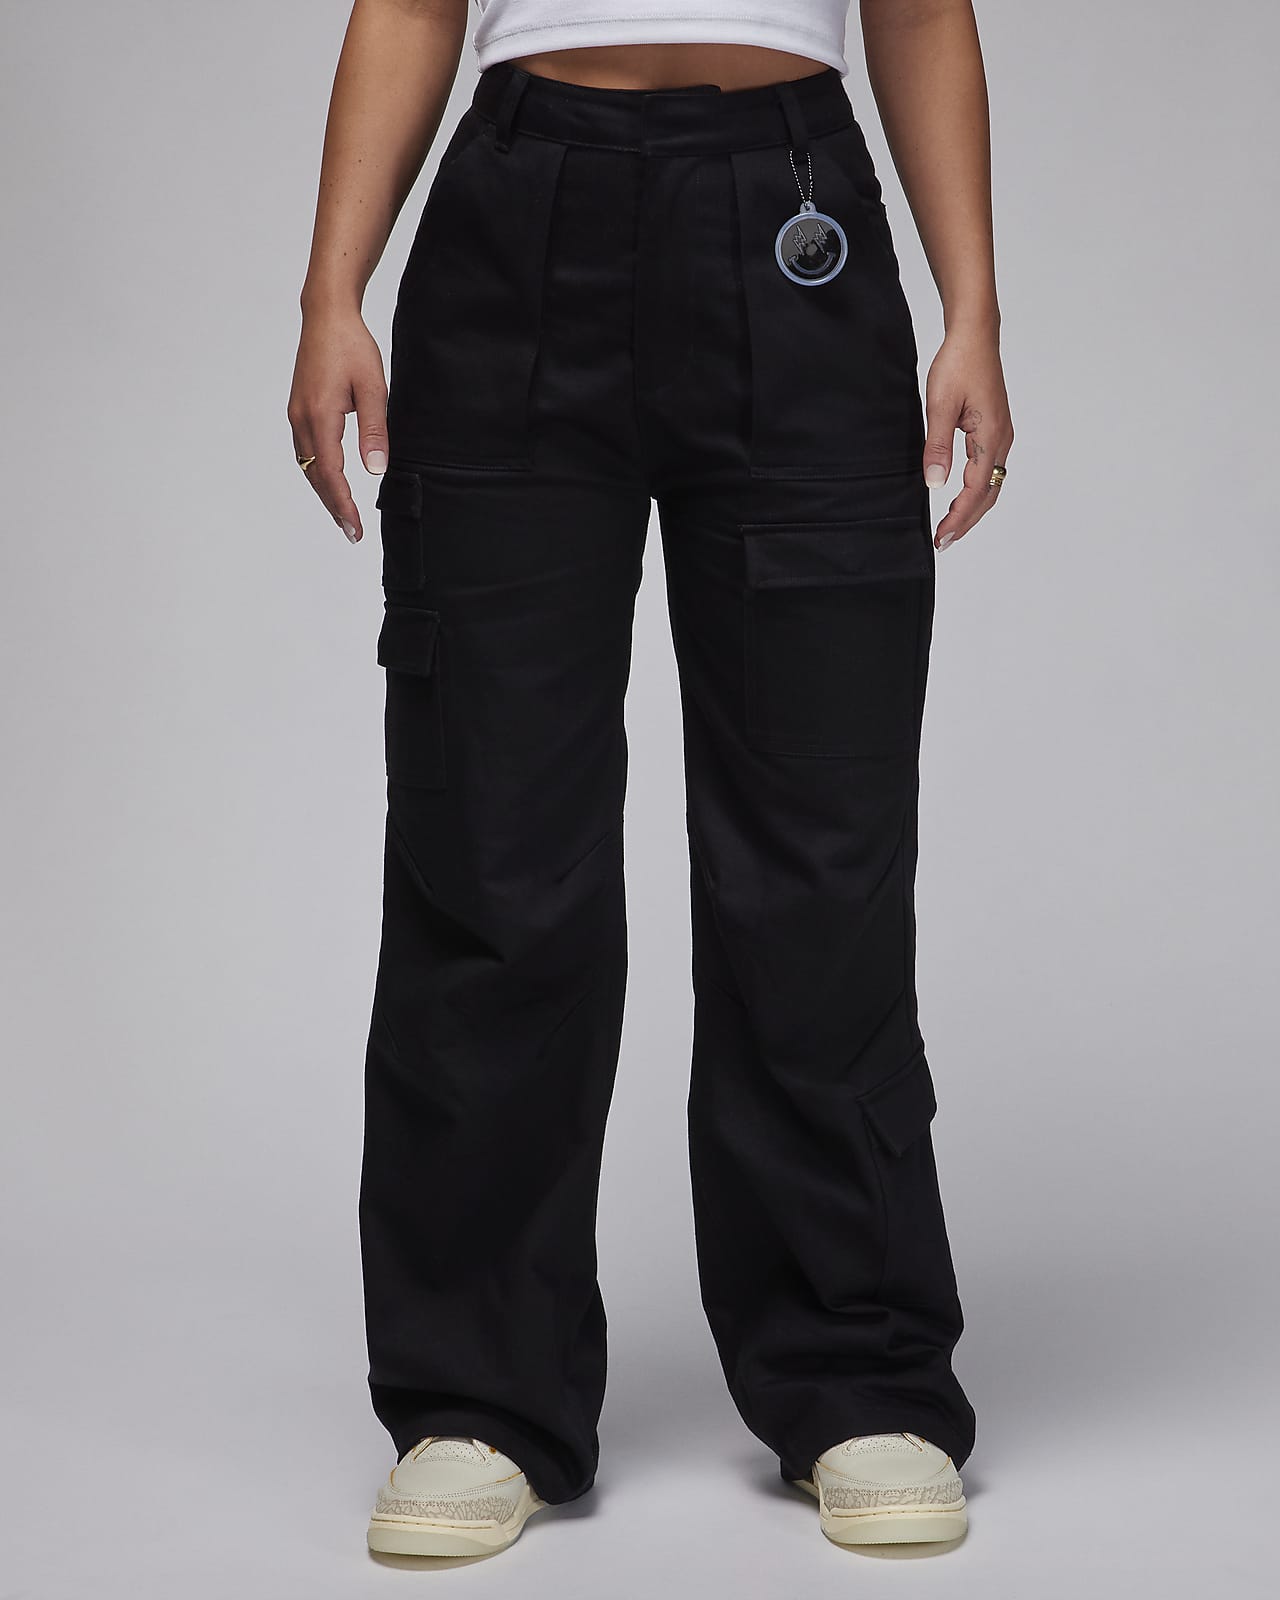 Jordan Toggle Pants by Cotton On Online, THE ICONIC